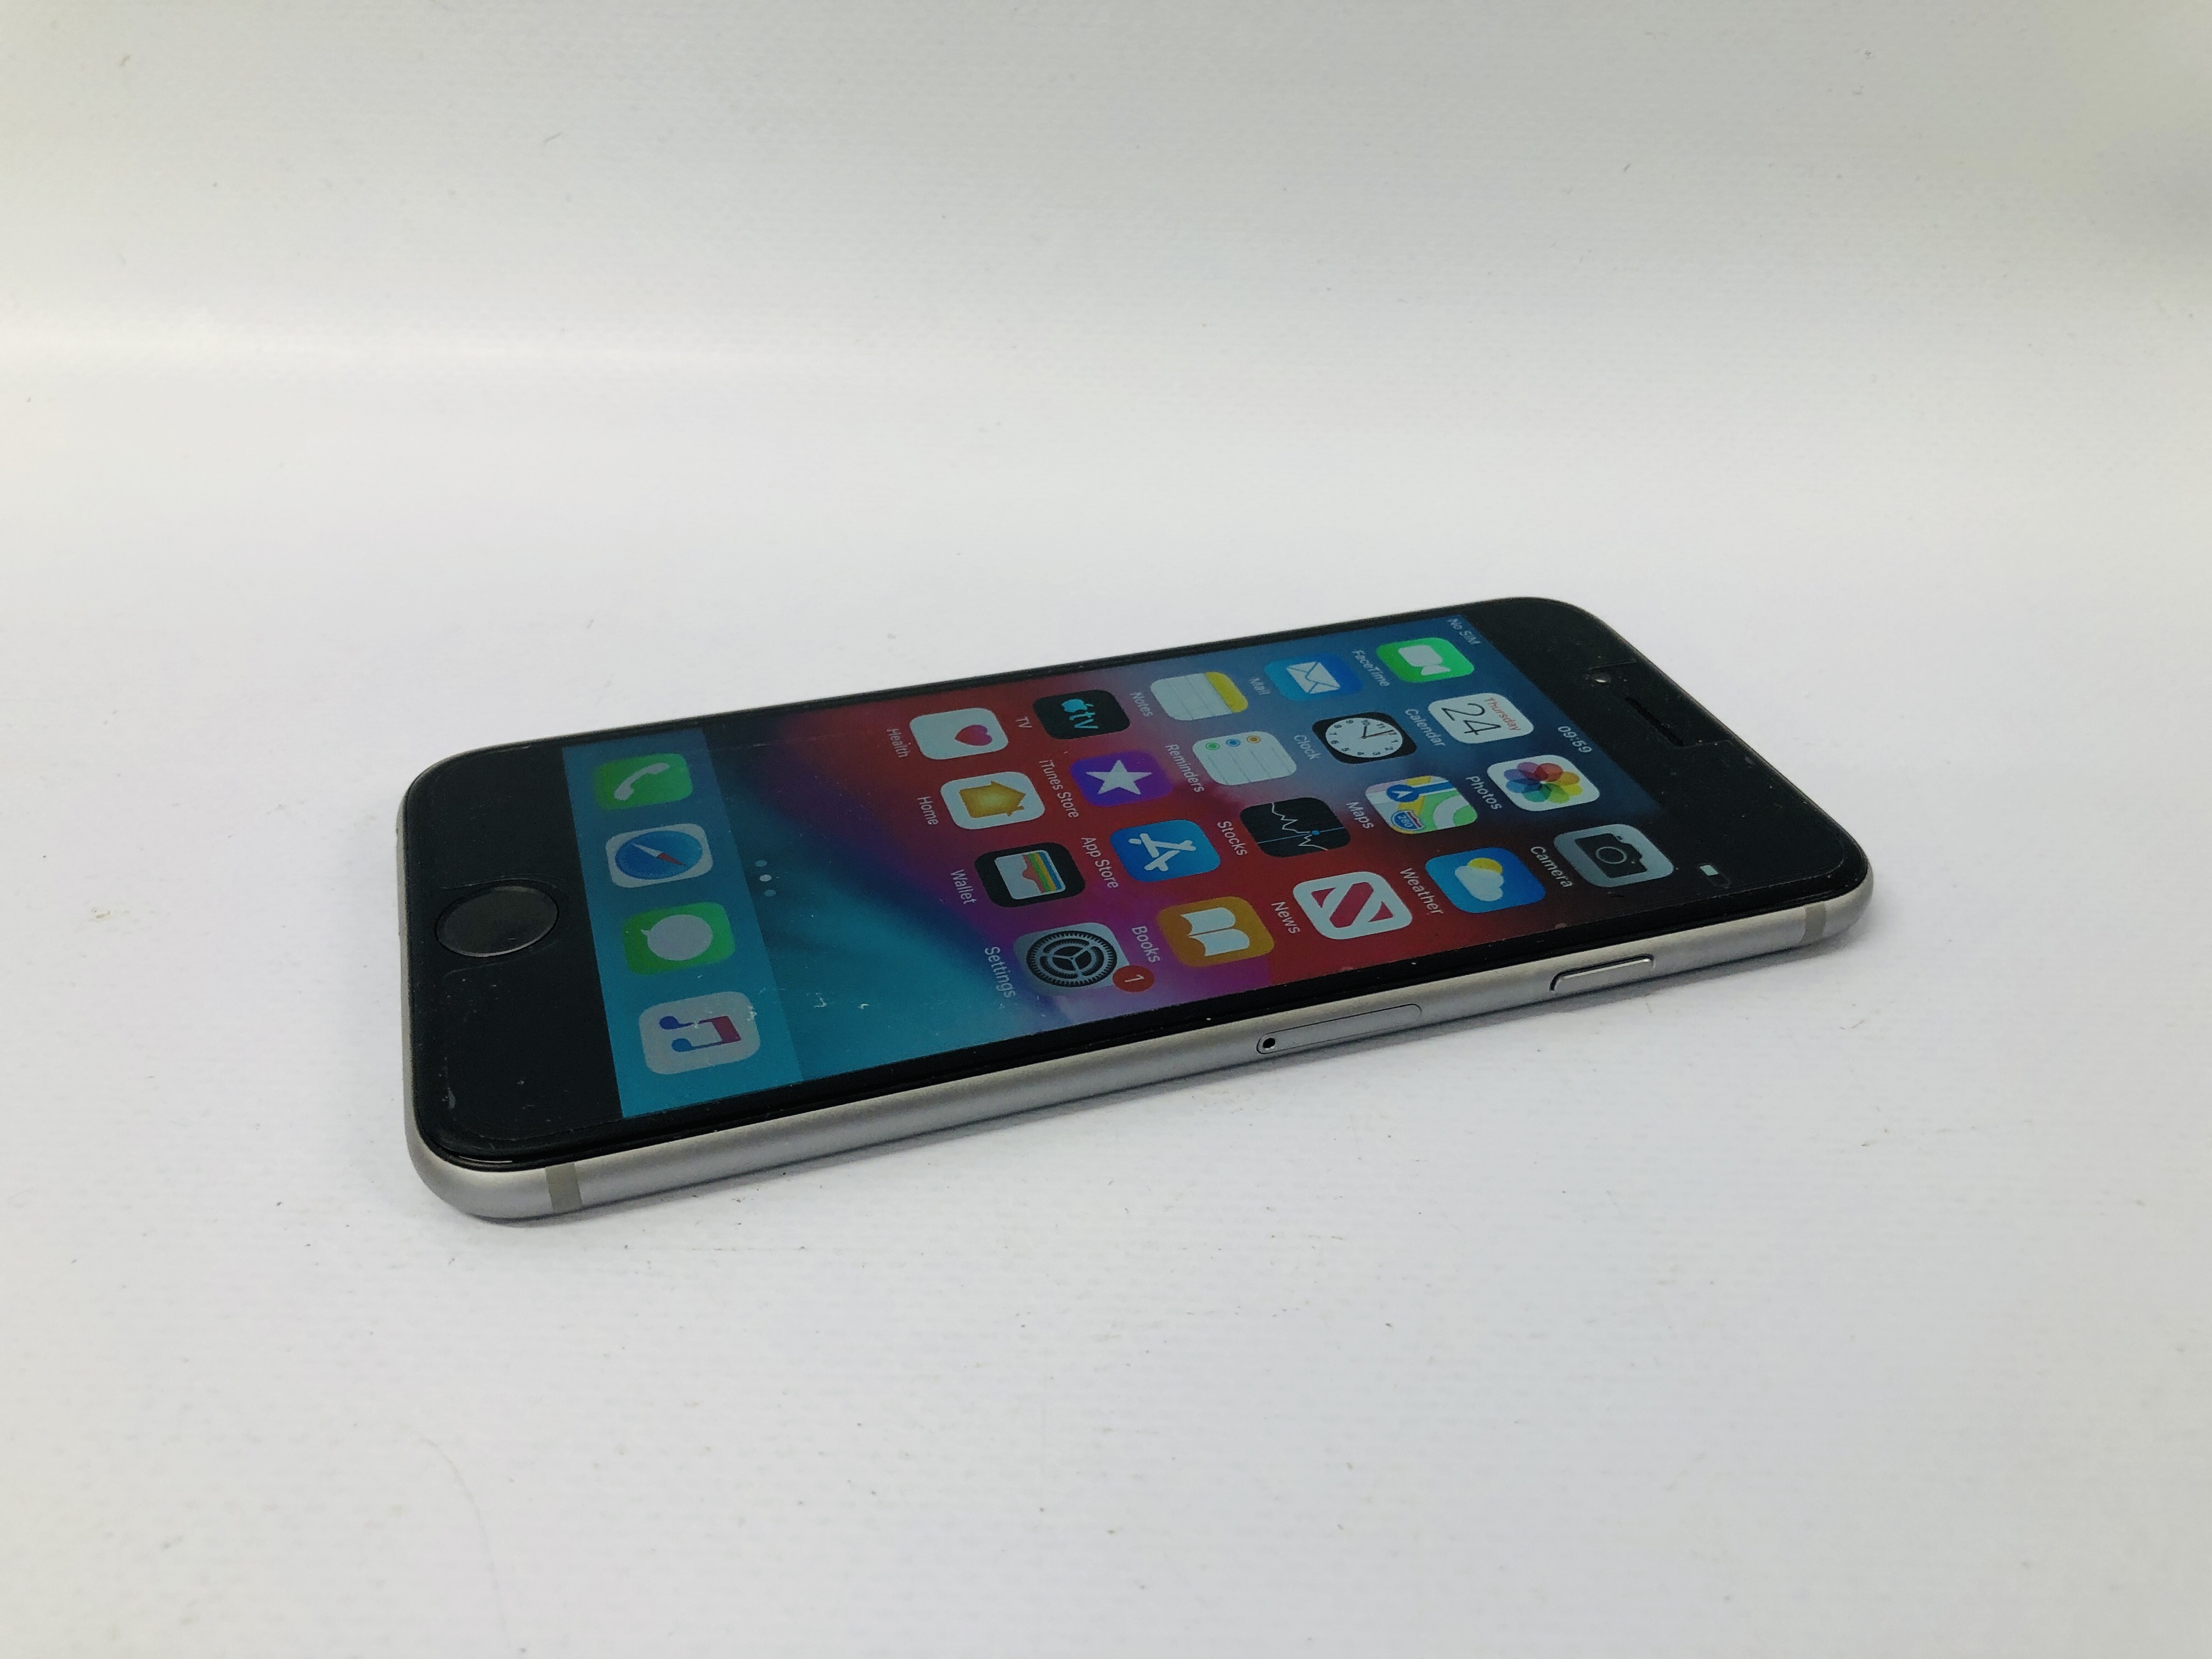 APPLE IPHONE 6 32GB - NO GUARANTEE OF CONNECTIVITY. SOLD AS SEEN. - Image 4 of 6